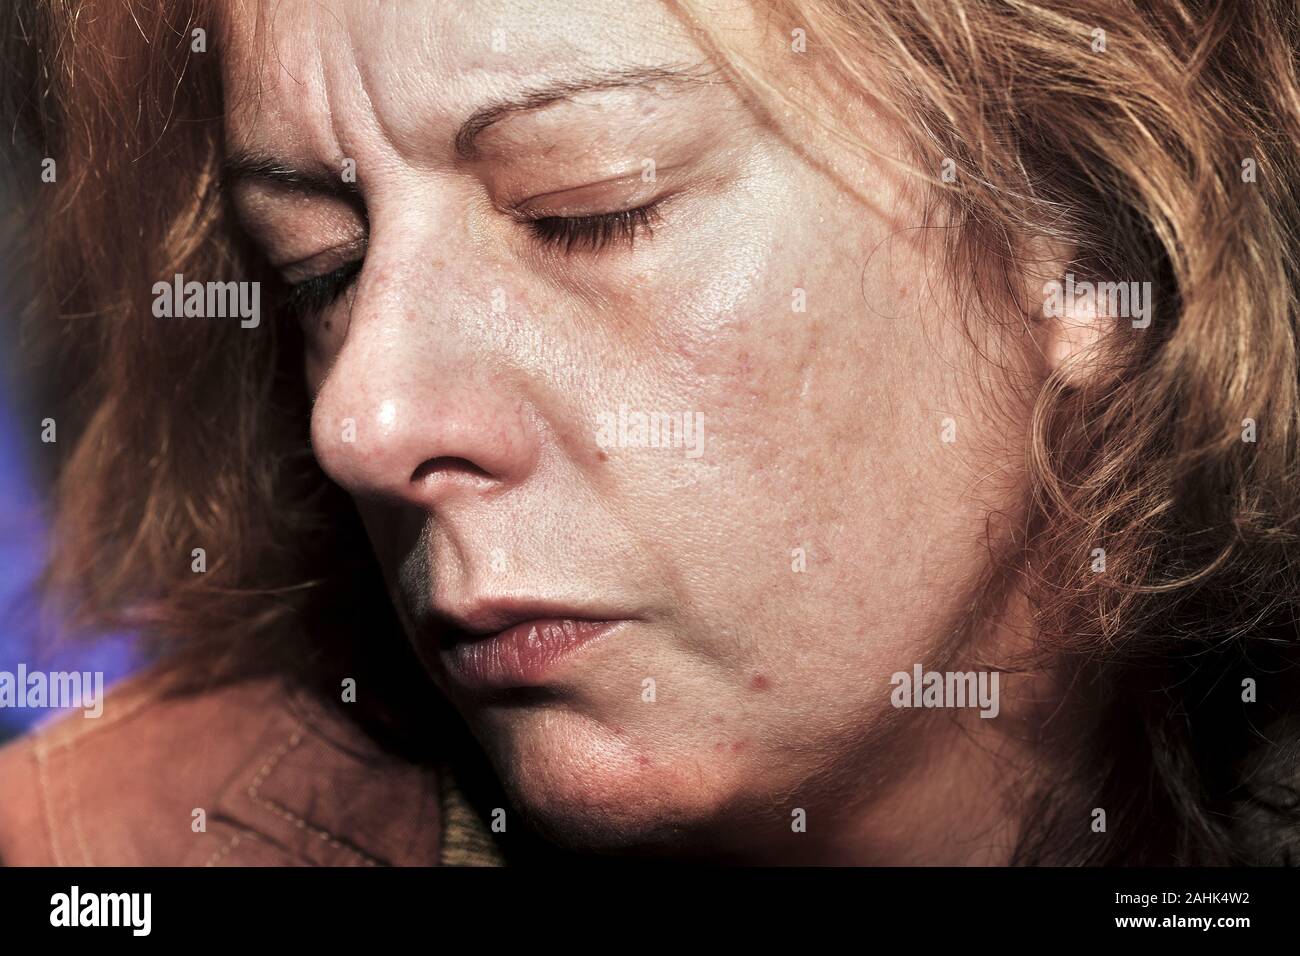 Alcoholic woman with severe depression. Stock Photo